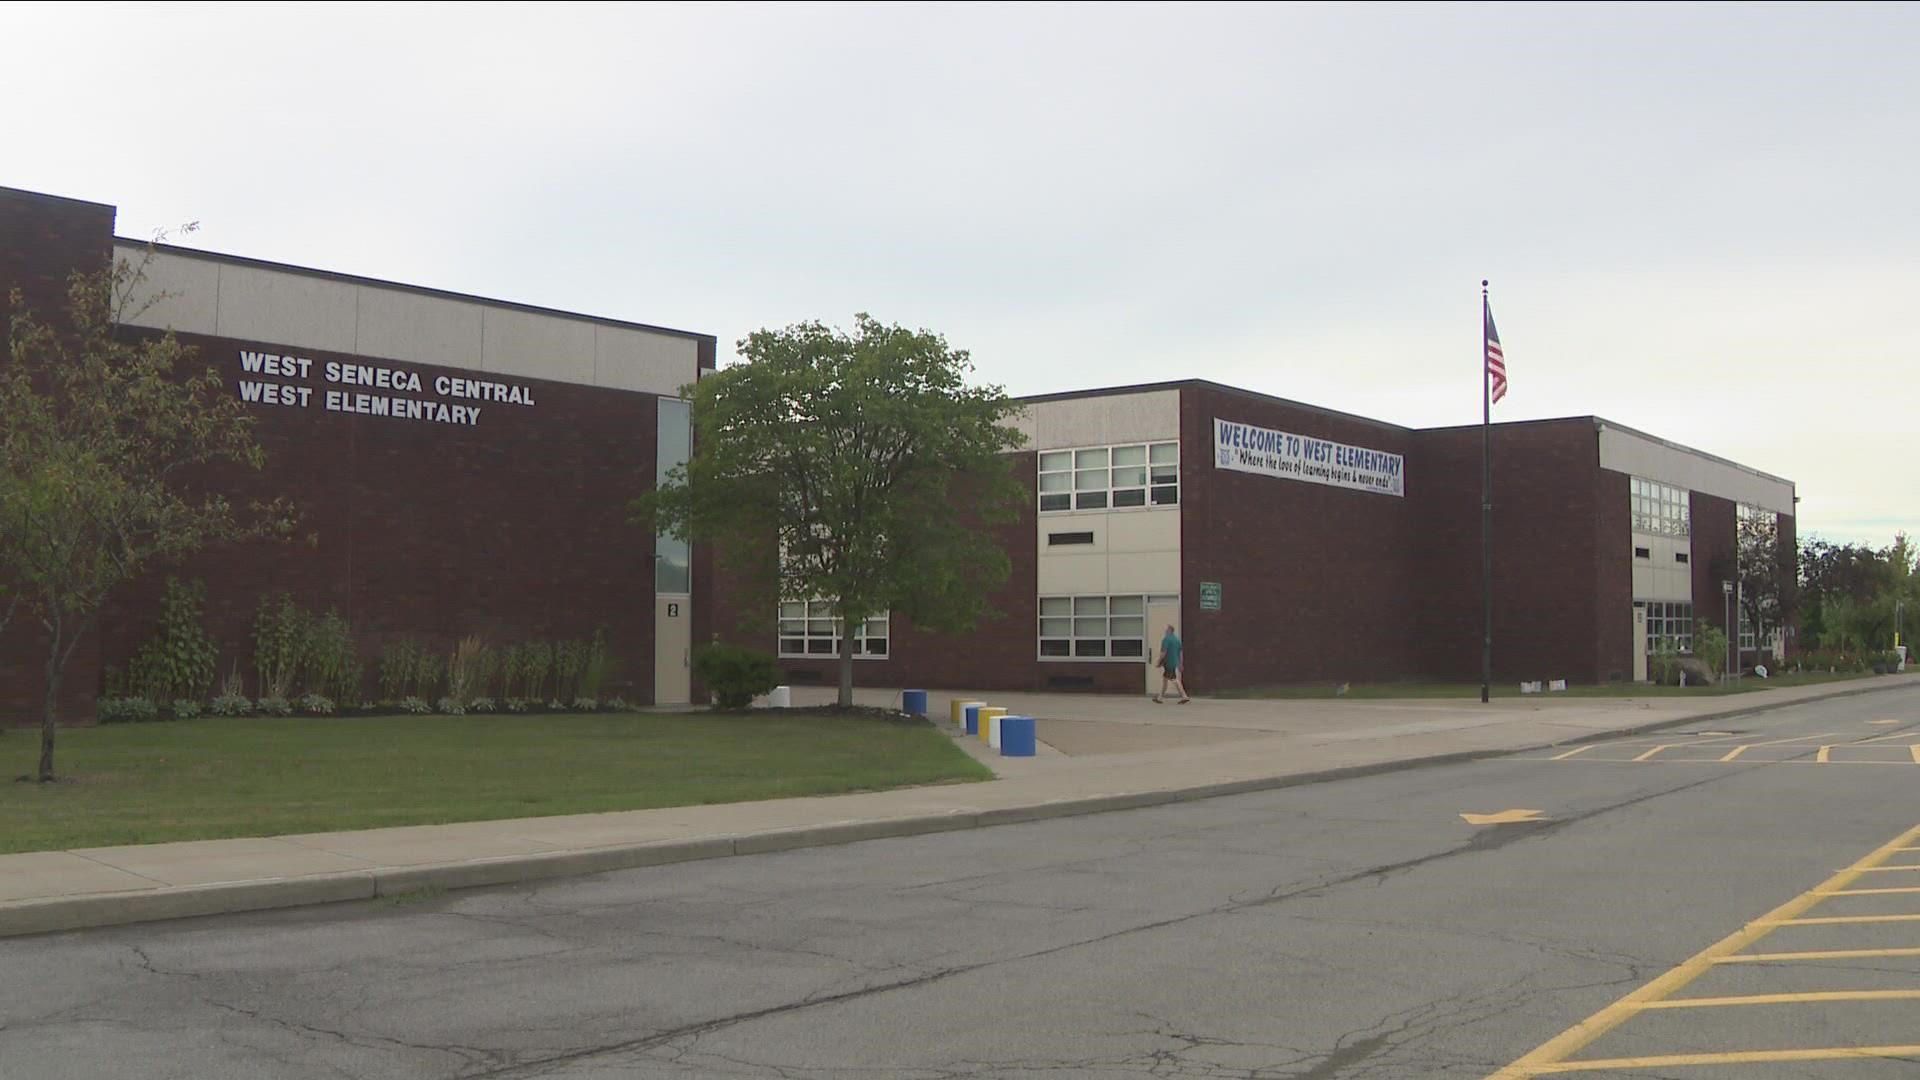 Leaders in West Seneca are considering a proposal to downsize the school district.